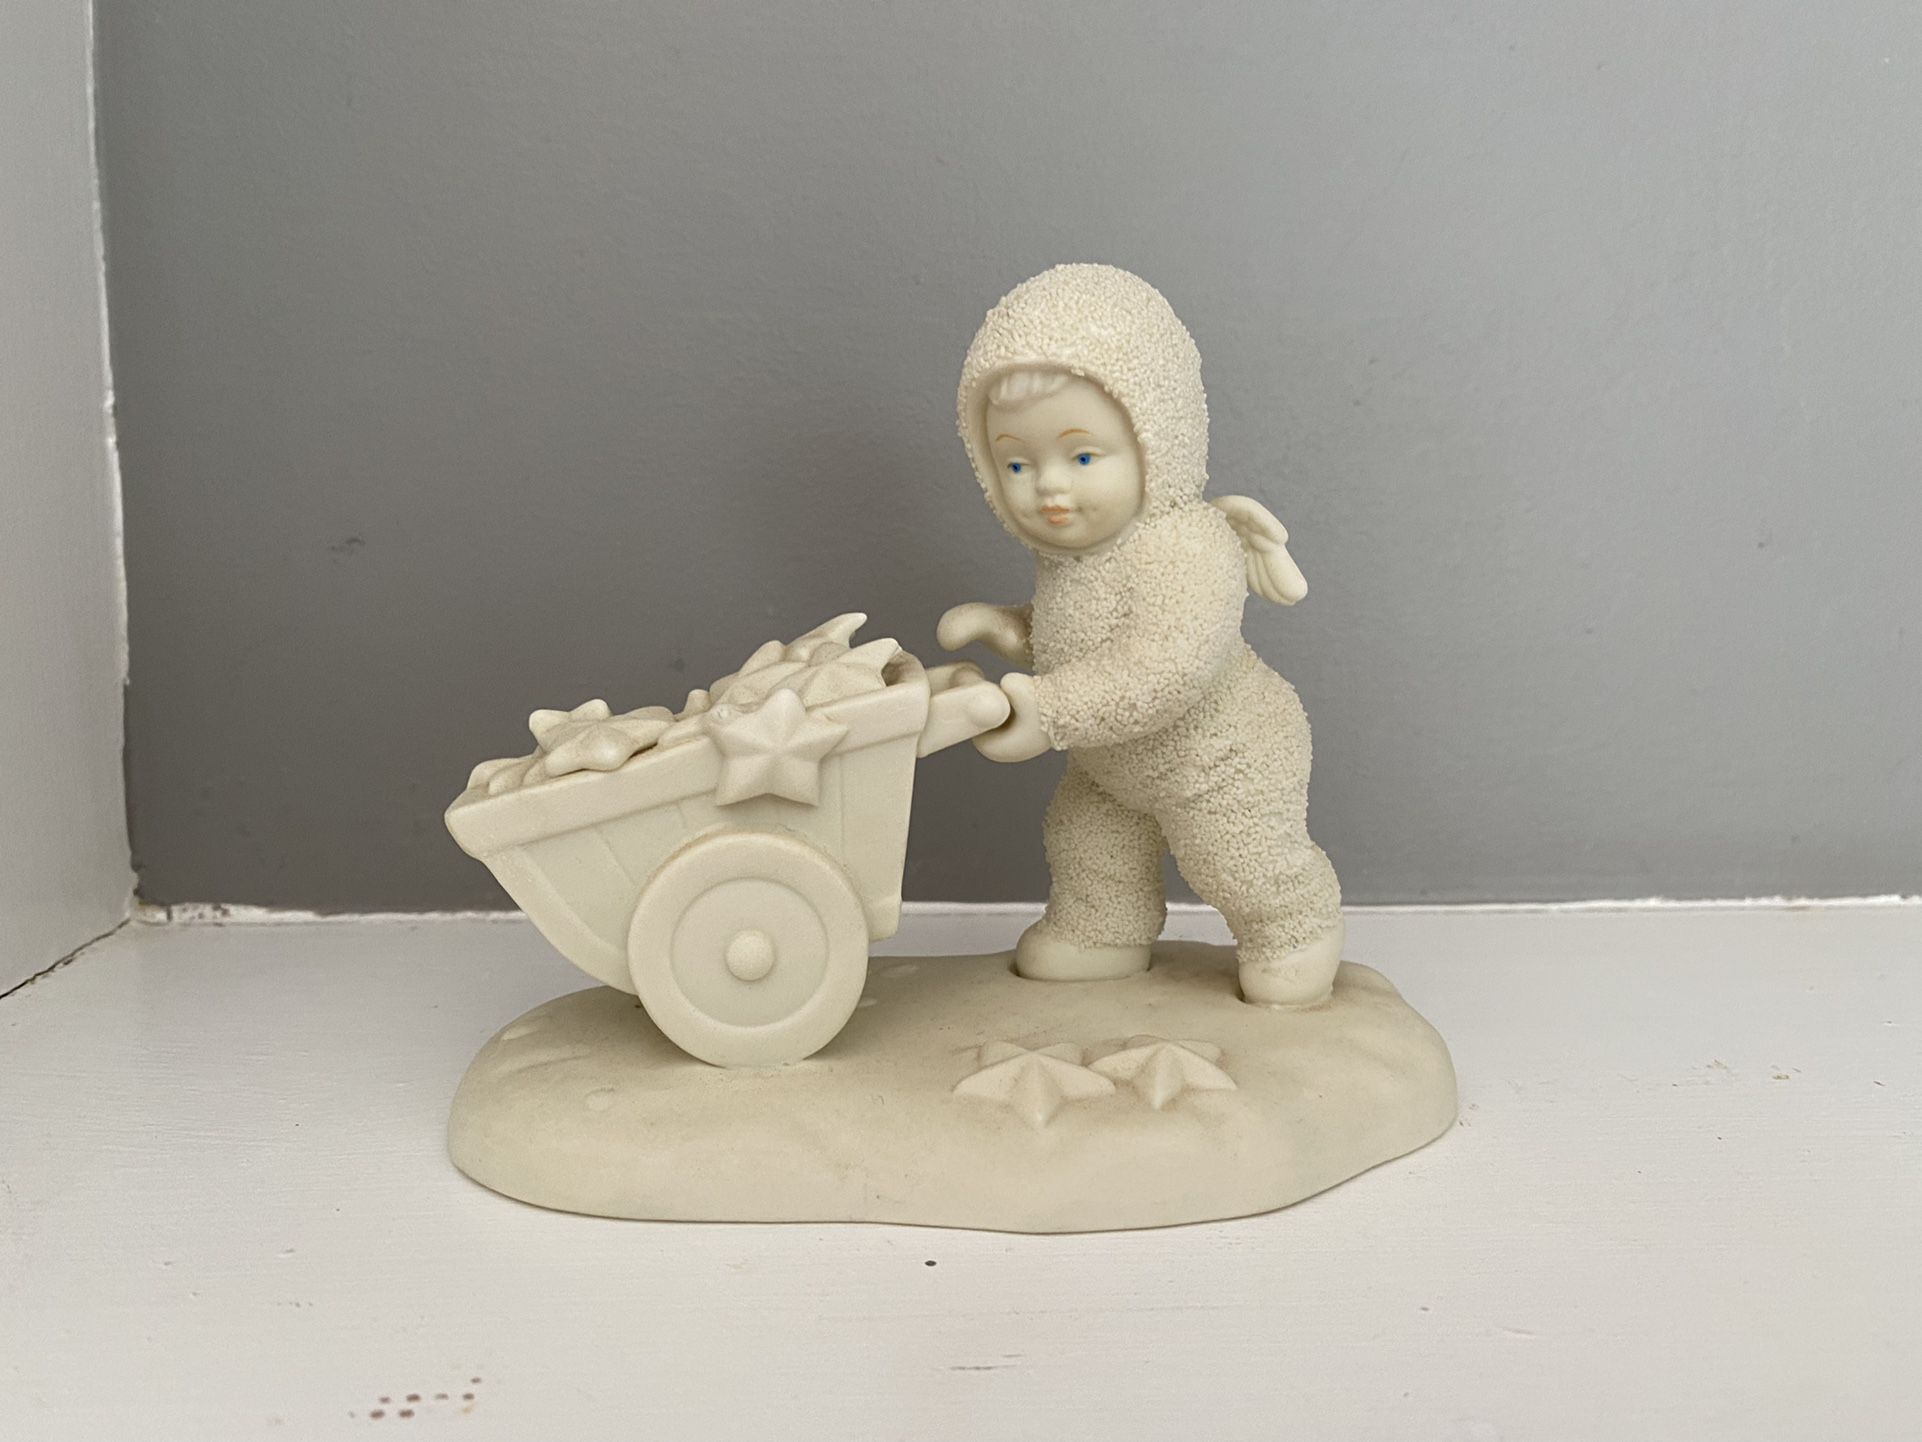 Dept 56 Snowbabies There’s Another One Figurine 